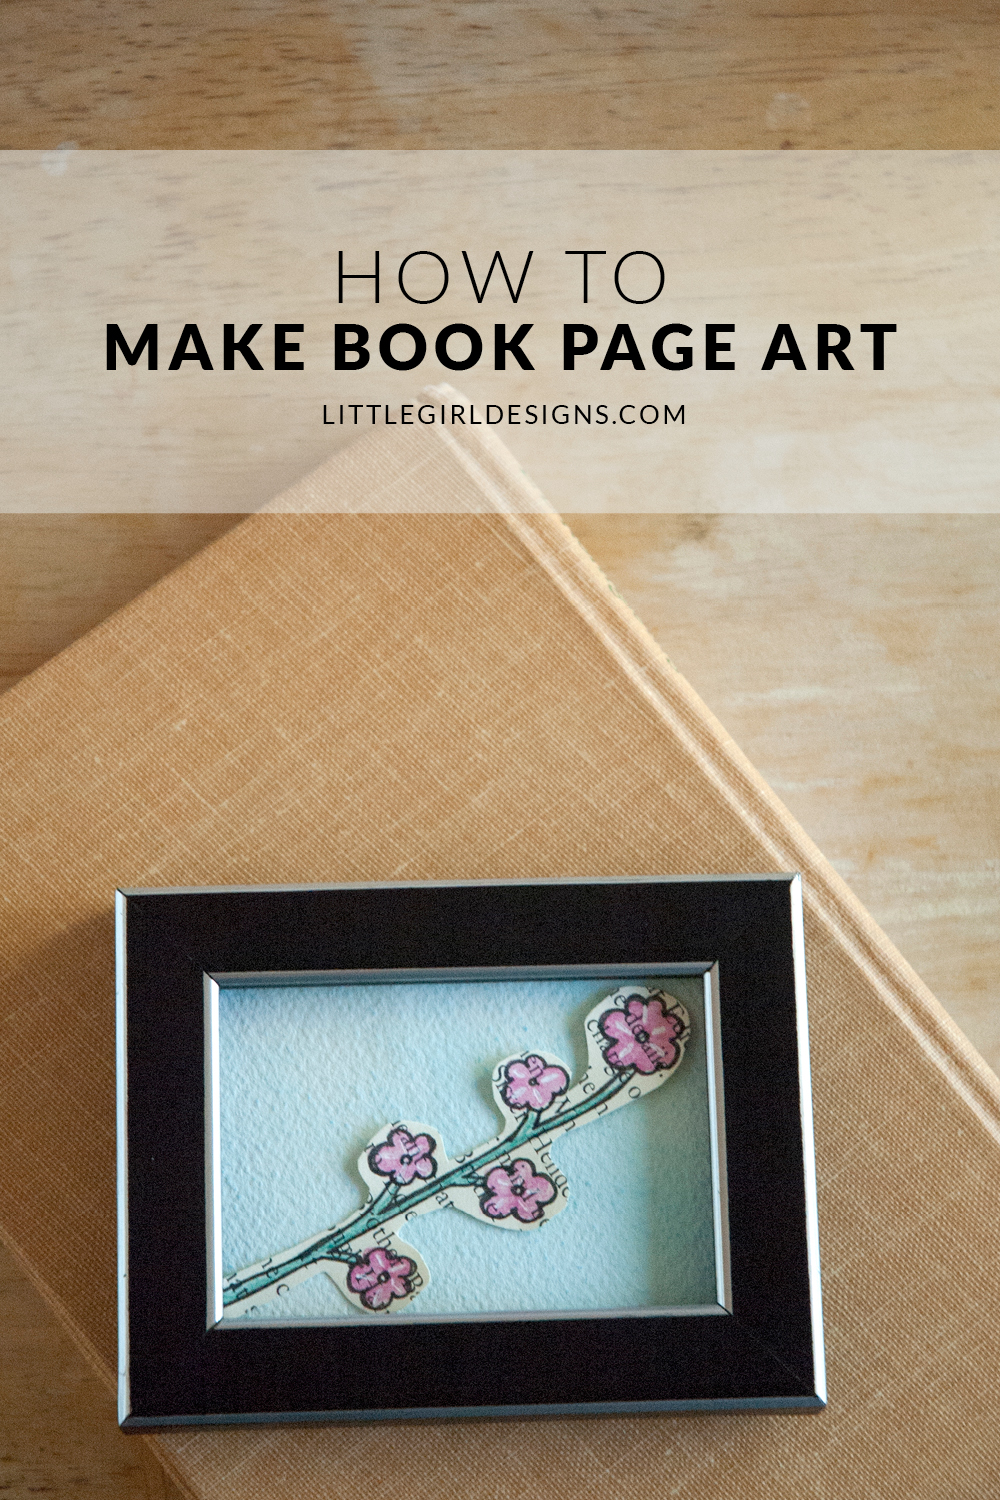 How to Make Book Page Art